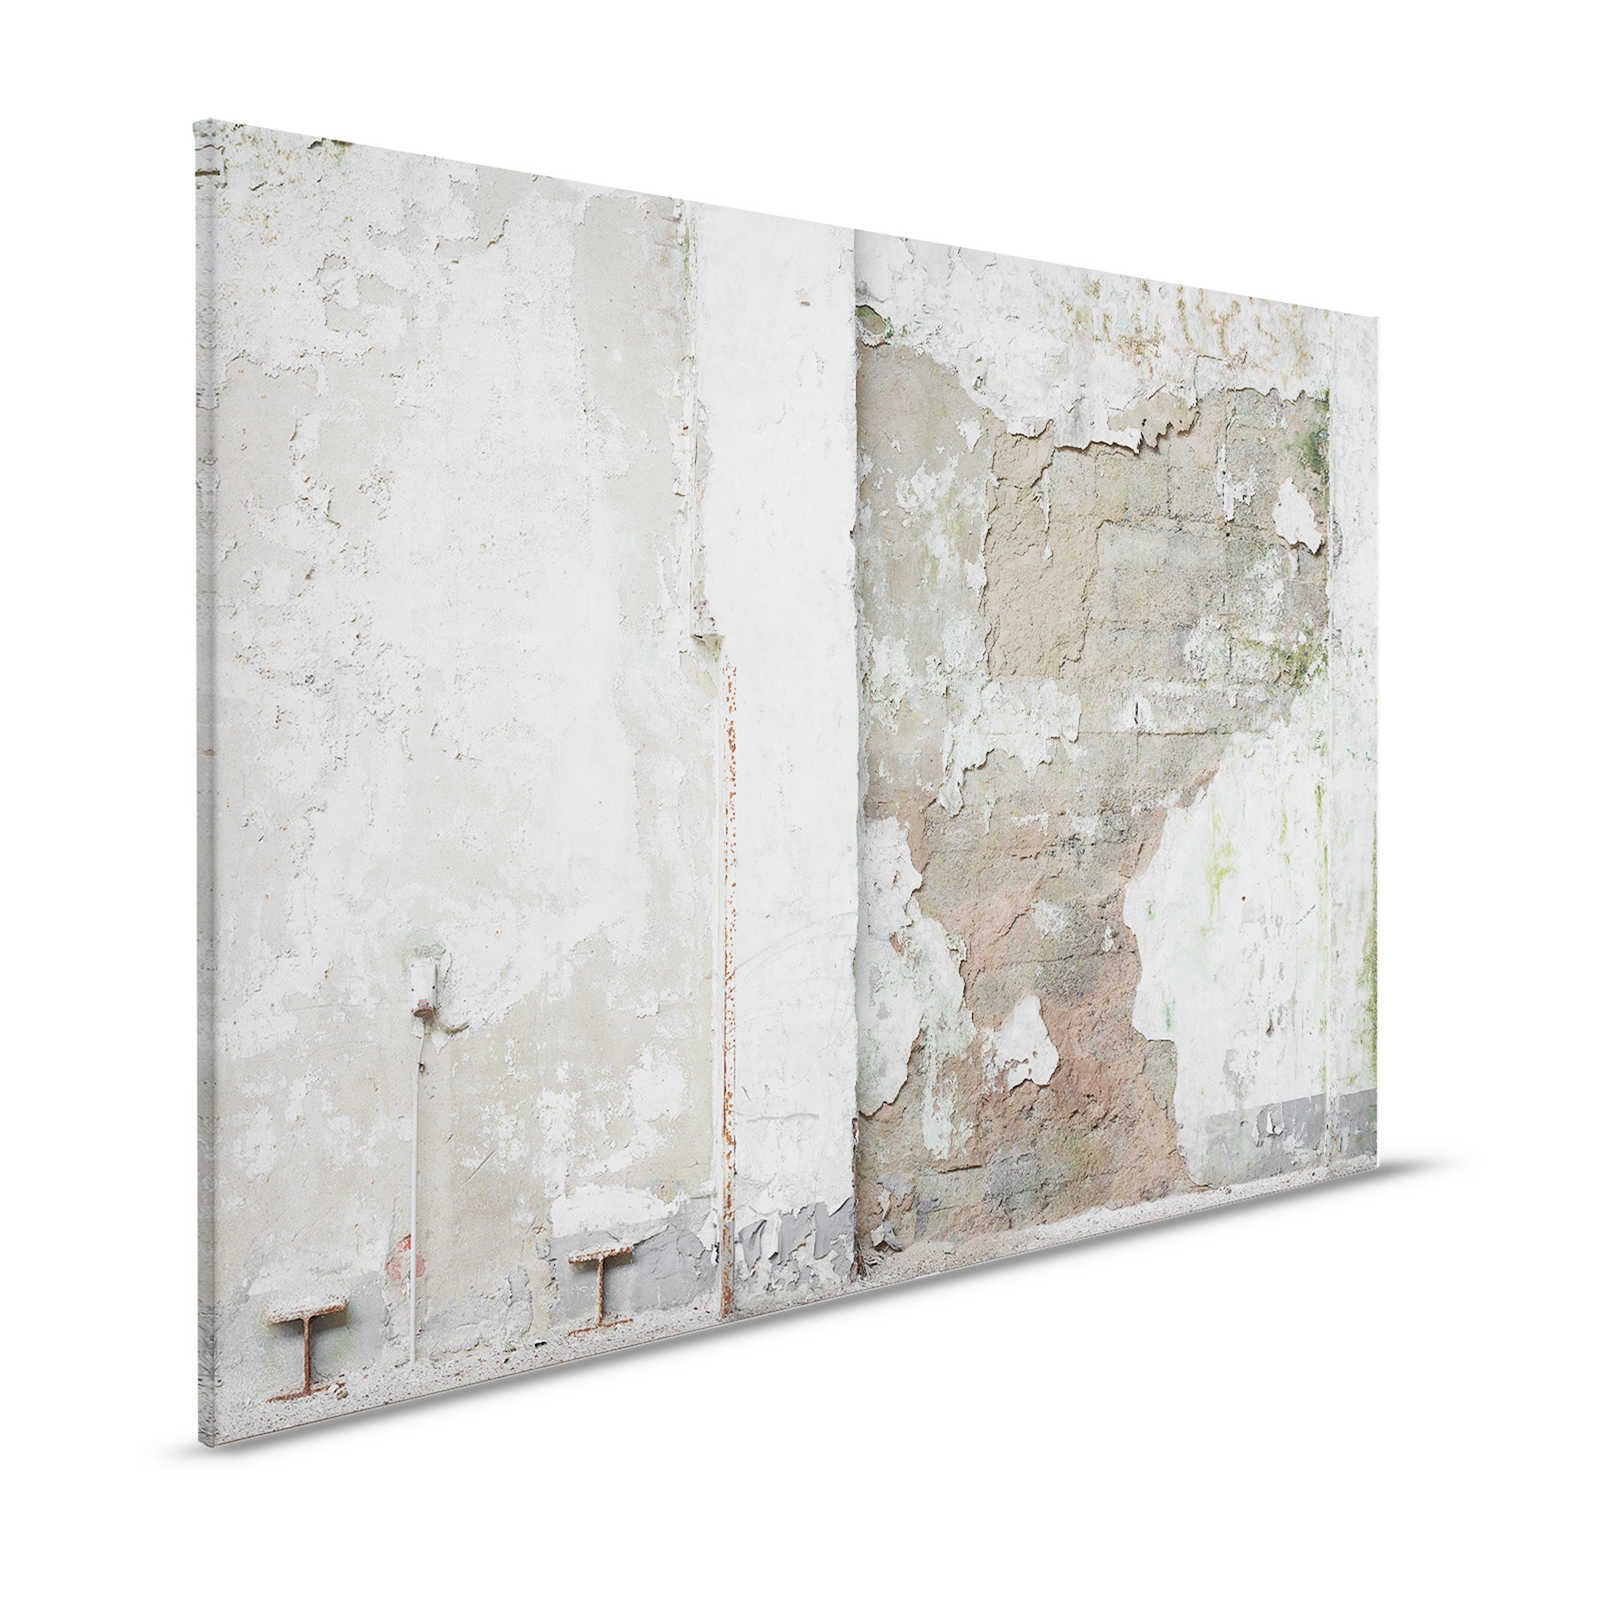 Concrete Used Look Canvas Painting - 1.20 m x 0.80 m
